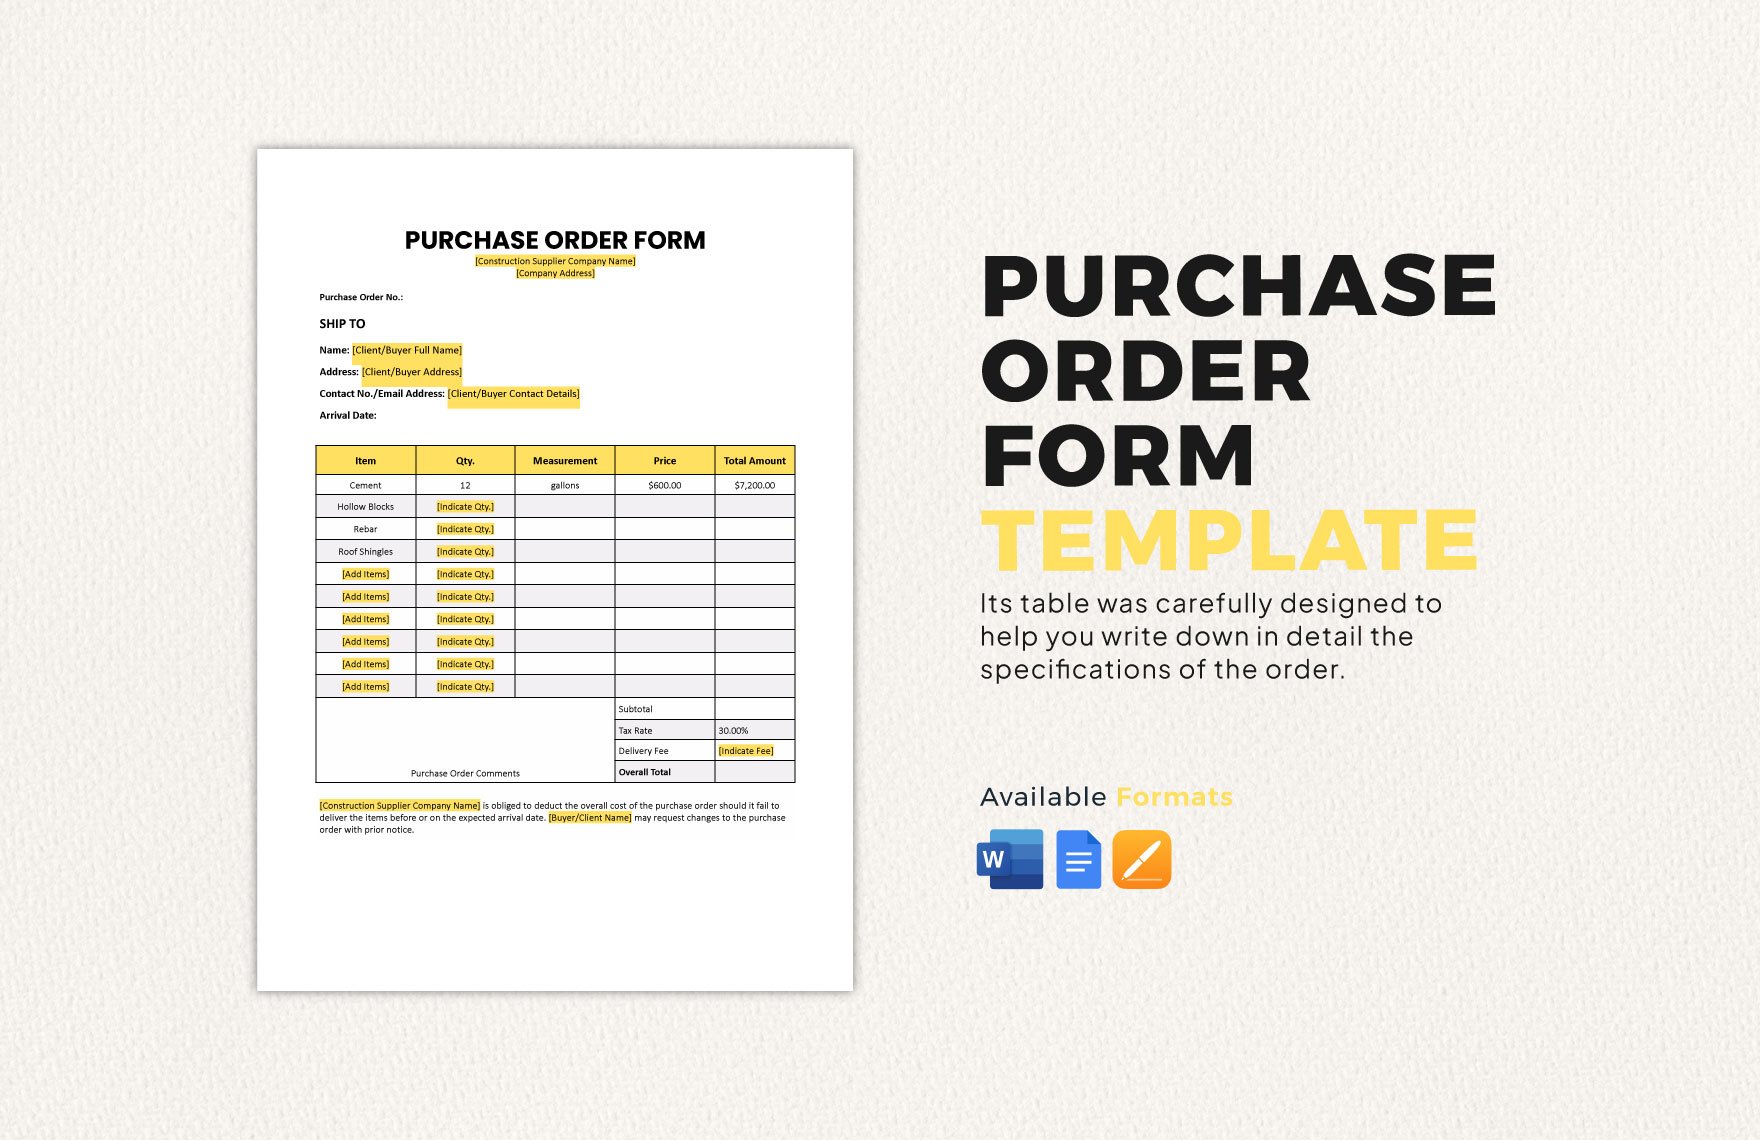 Sample Purchase Order Form Template